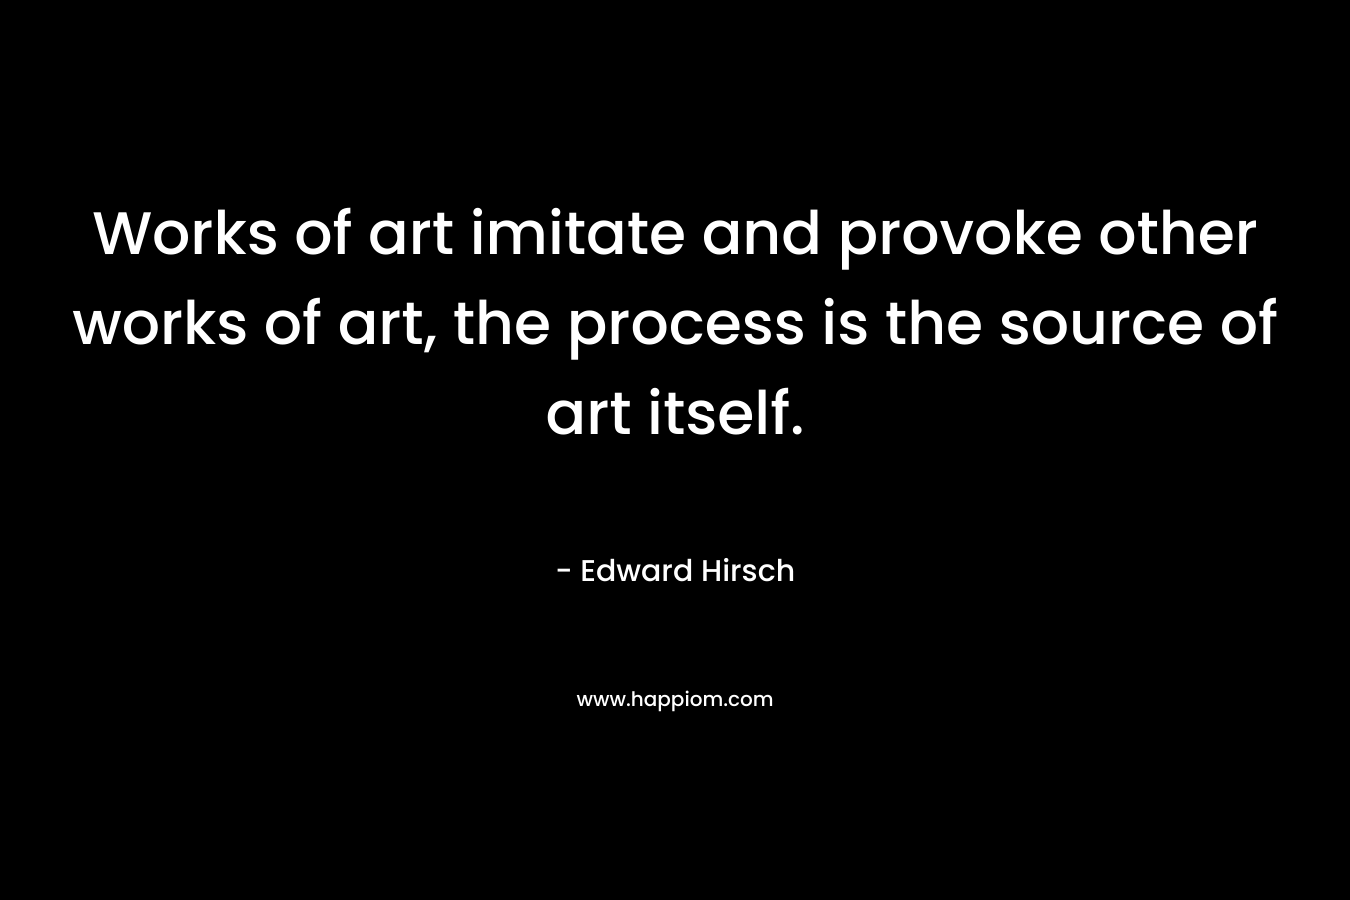 Works of art imitate and provoke other works of art, the process is the source of art itself.